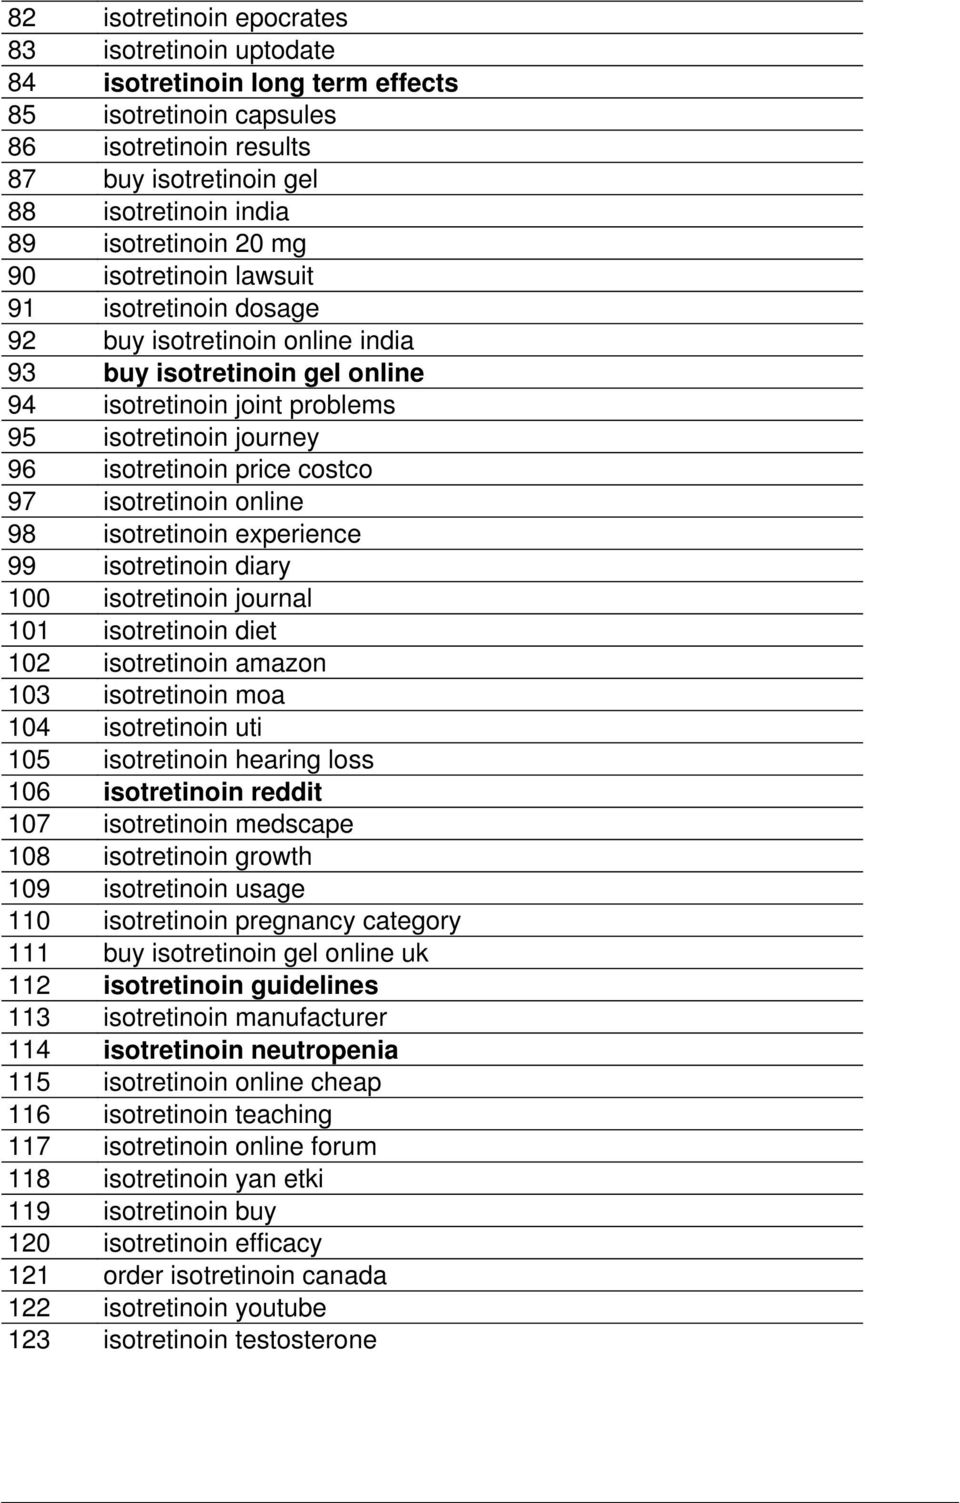 97 isotretinoin online 98 isotretinoin experience 99 isotretinoin diary 100 isotretinoin journal 101 isotretinoin diet 102 isotretinoin amazon 103 isotretinoin moa 104 isotretinoin uti 105